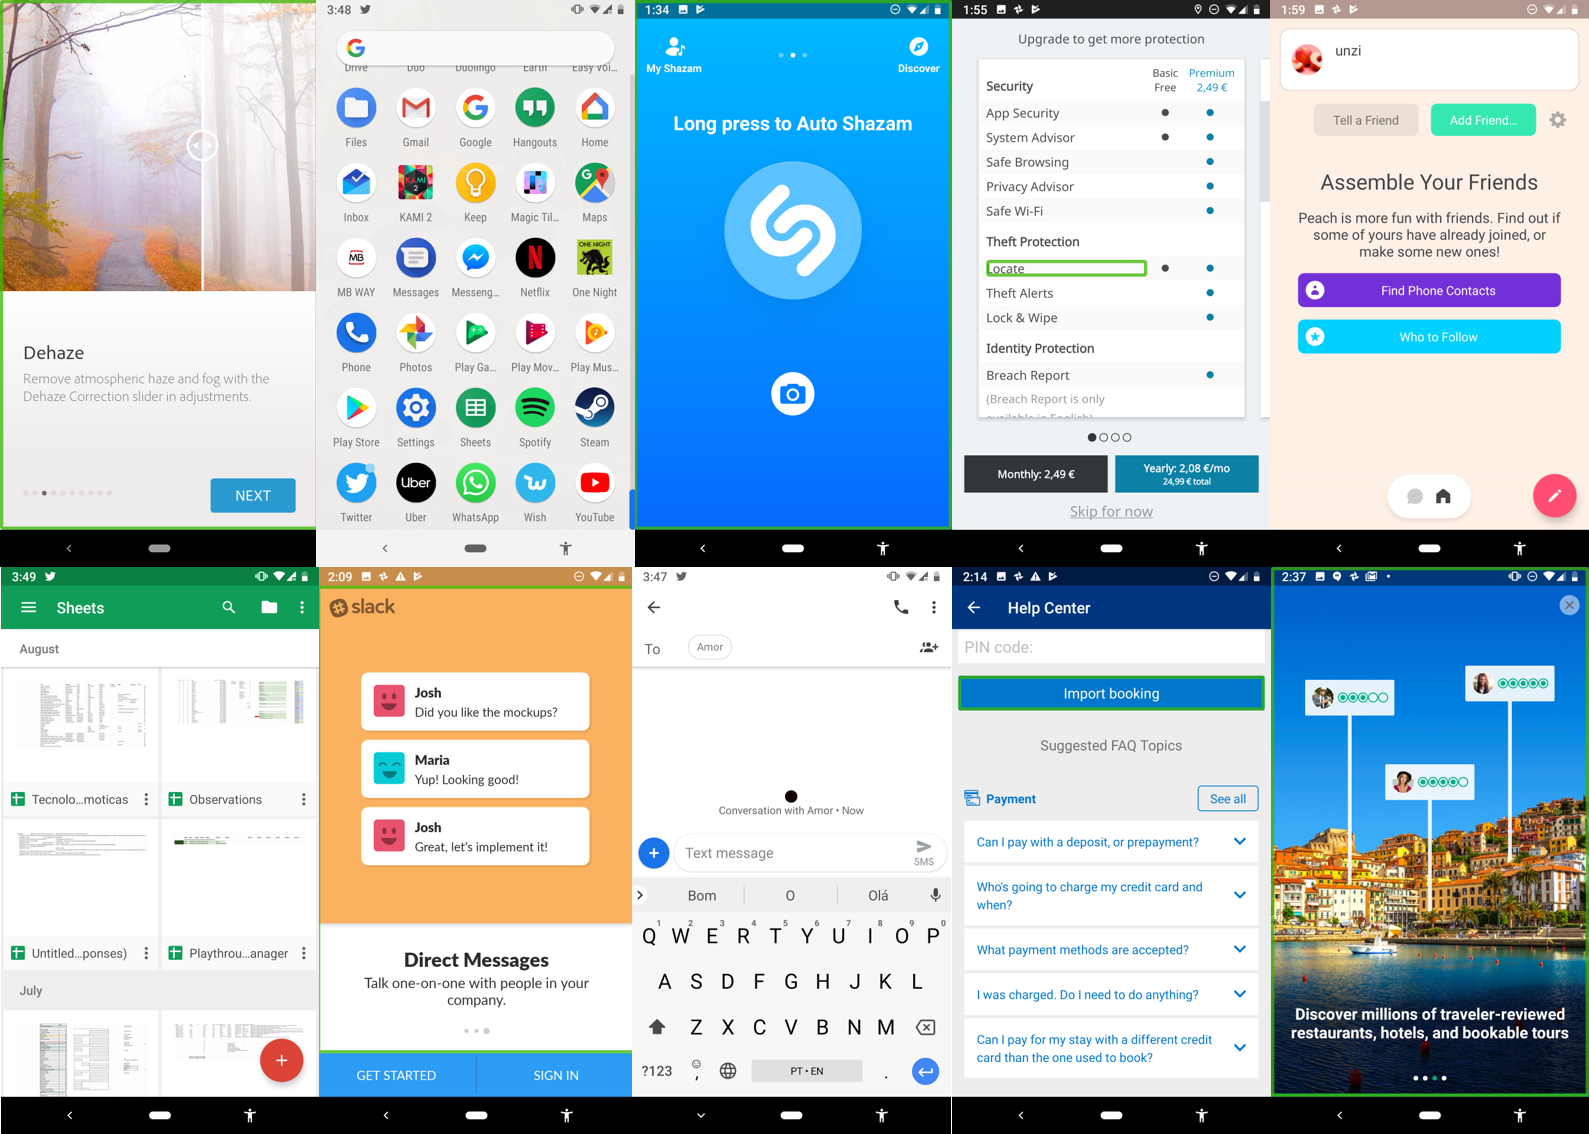 10 different smartphone applications with 10 very different interfaces.